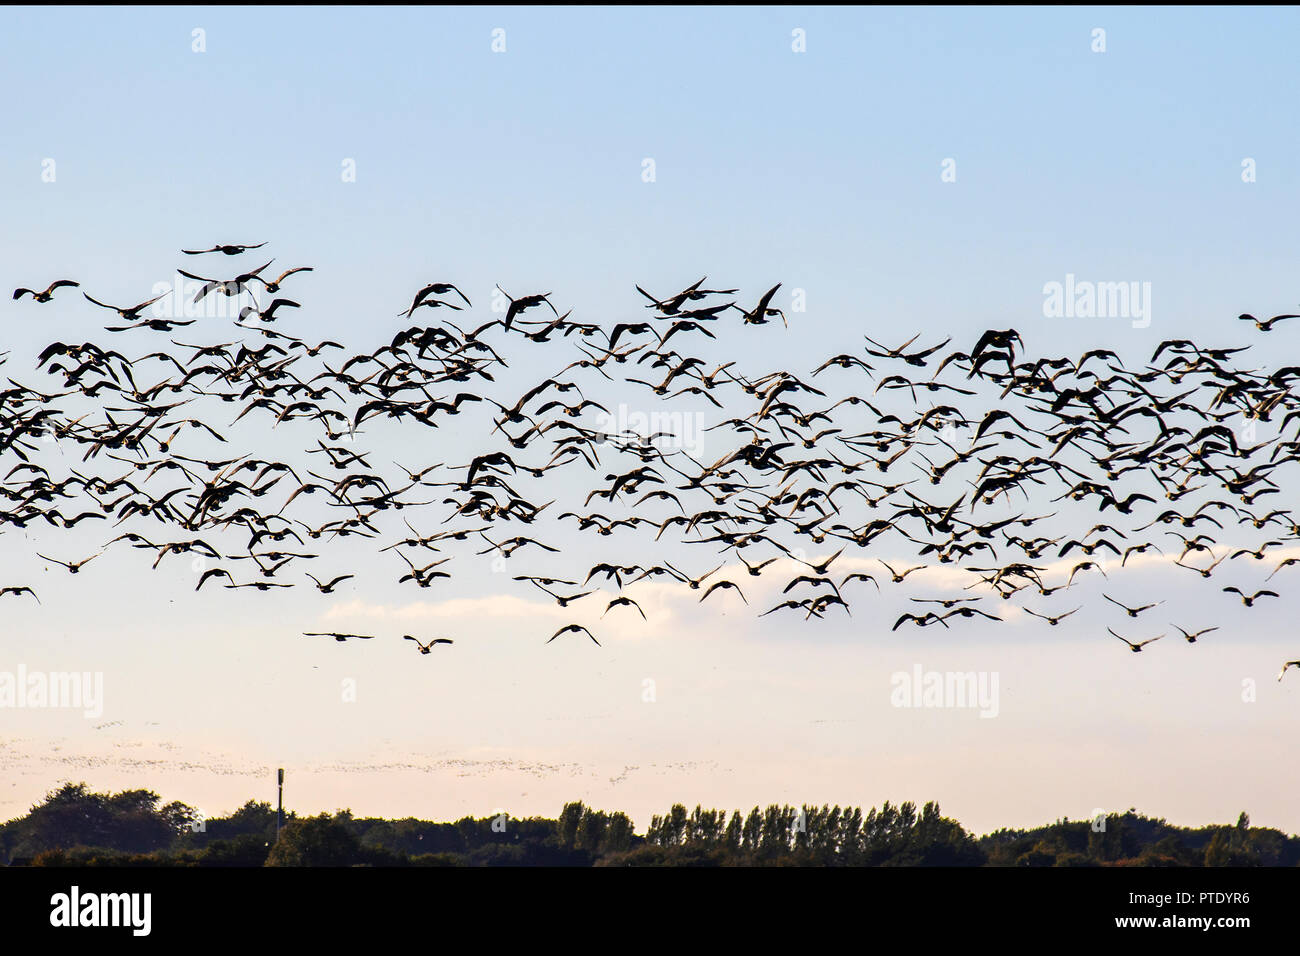 Tarleton, Lancashire. Uk Weather 09/10/2018. Up to 12,000 pink-footed migratory geese newly arrived from Iceland have taken up residence in the wetlands of Lancashire.  The geese, which will eventually number near the 100,000 mark, arrive as food becomes scare in Iceland and they can fatten up on the farmland potato crops of West Lancashire before travelling further south in about a month’s time.  Credit; MediaWorldImages/AlamyLiveNews. Stock Photo